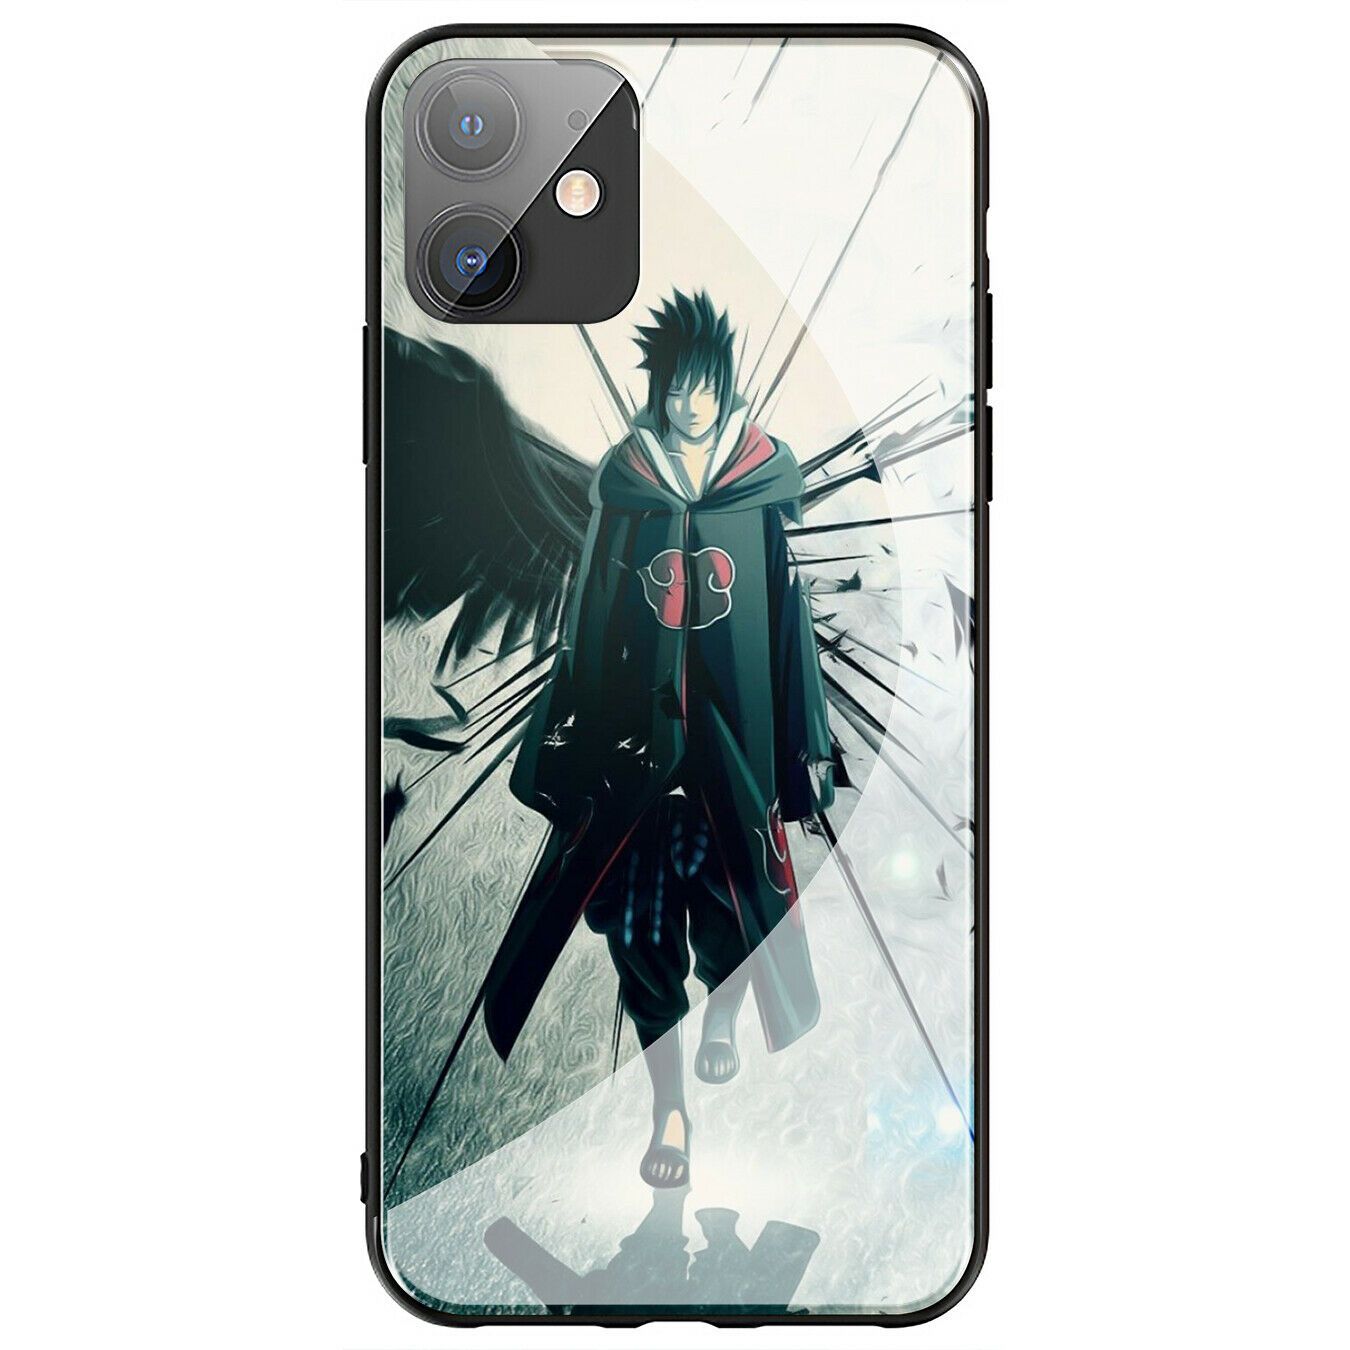 Sasuke NARUTO Akatsuki Glass Case for iPhone 11 Pro XR X XS Max 8 7 6 6s Plus + iPhone Cases AtlasCase 3 for iPhone 6/6S 